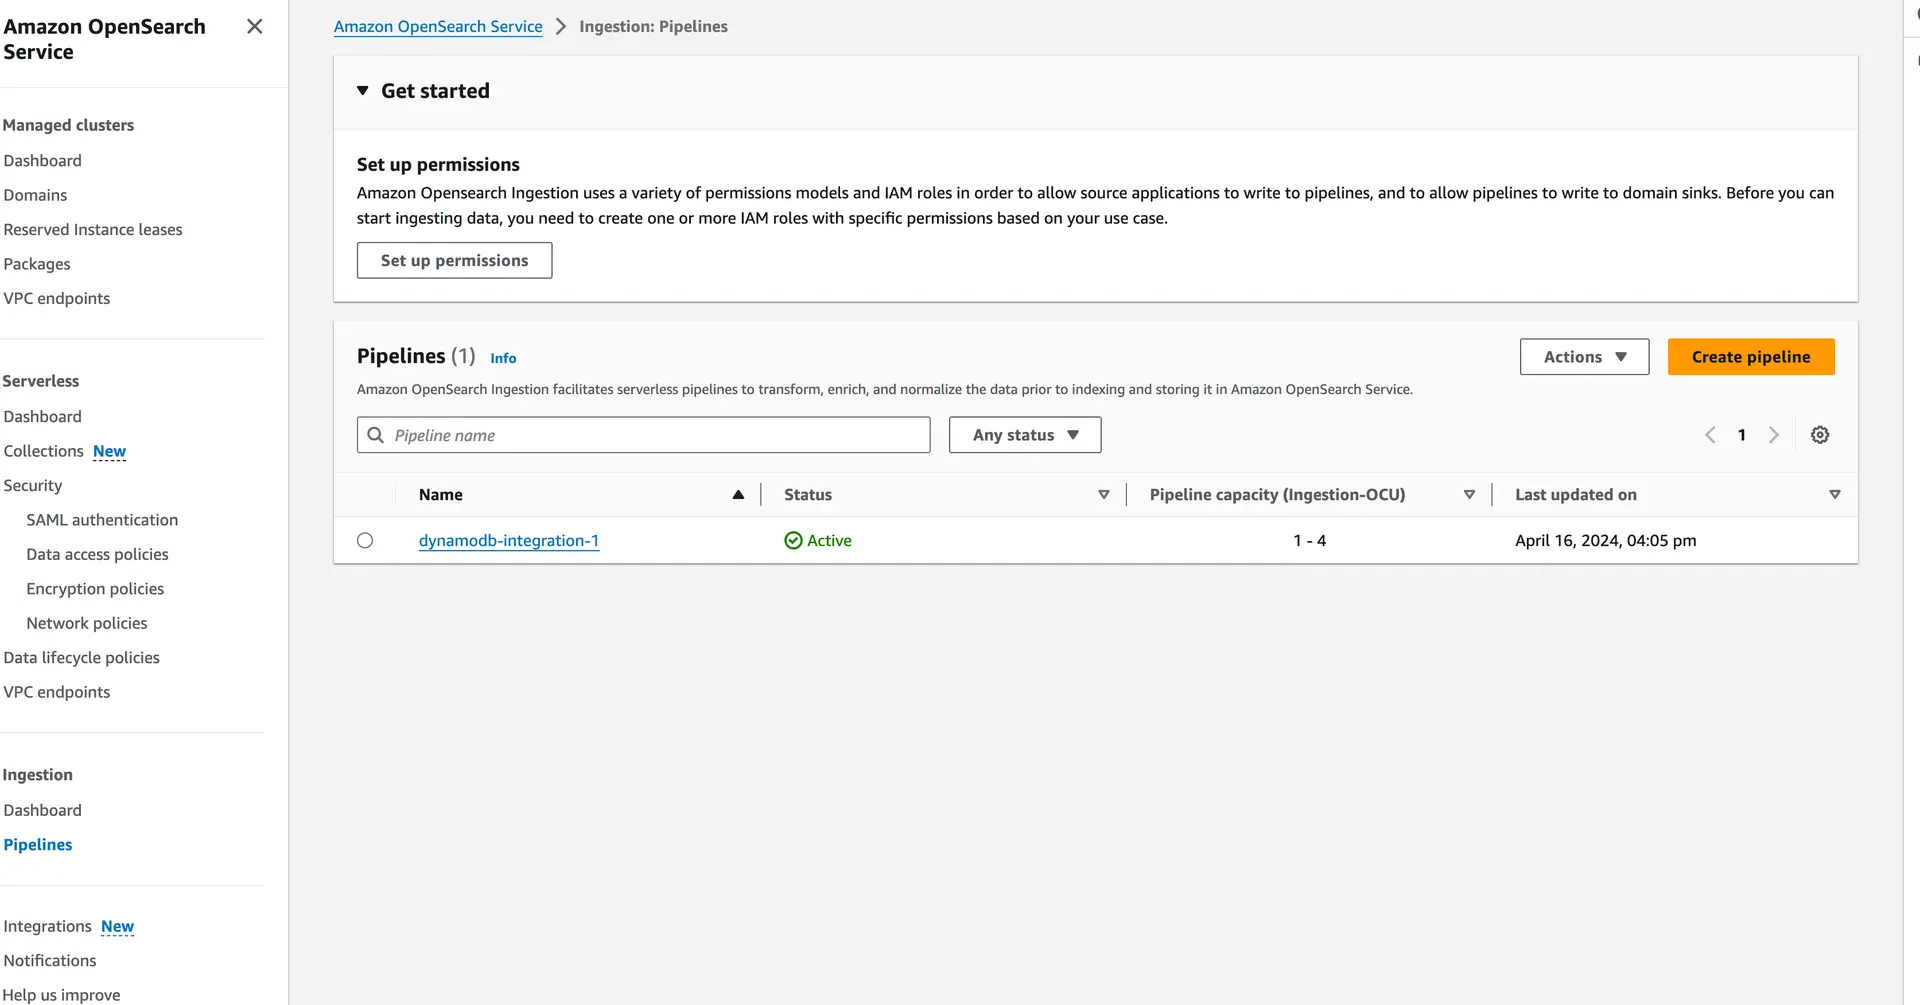 A screenshot displaying the OpenSearch OSIS pipeline created under the DynamoDB integrations section